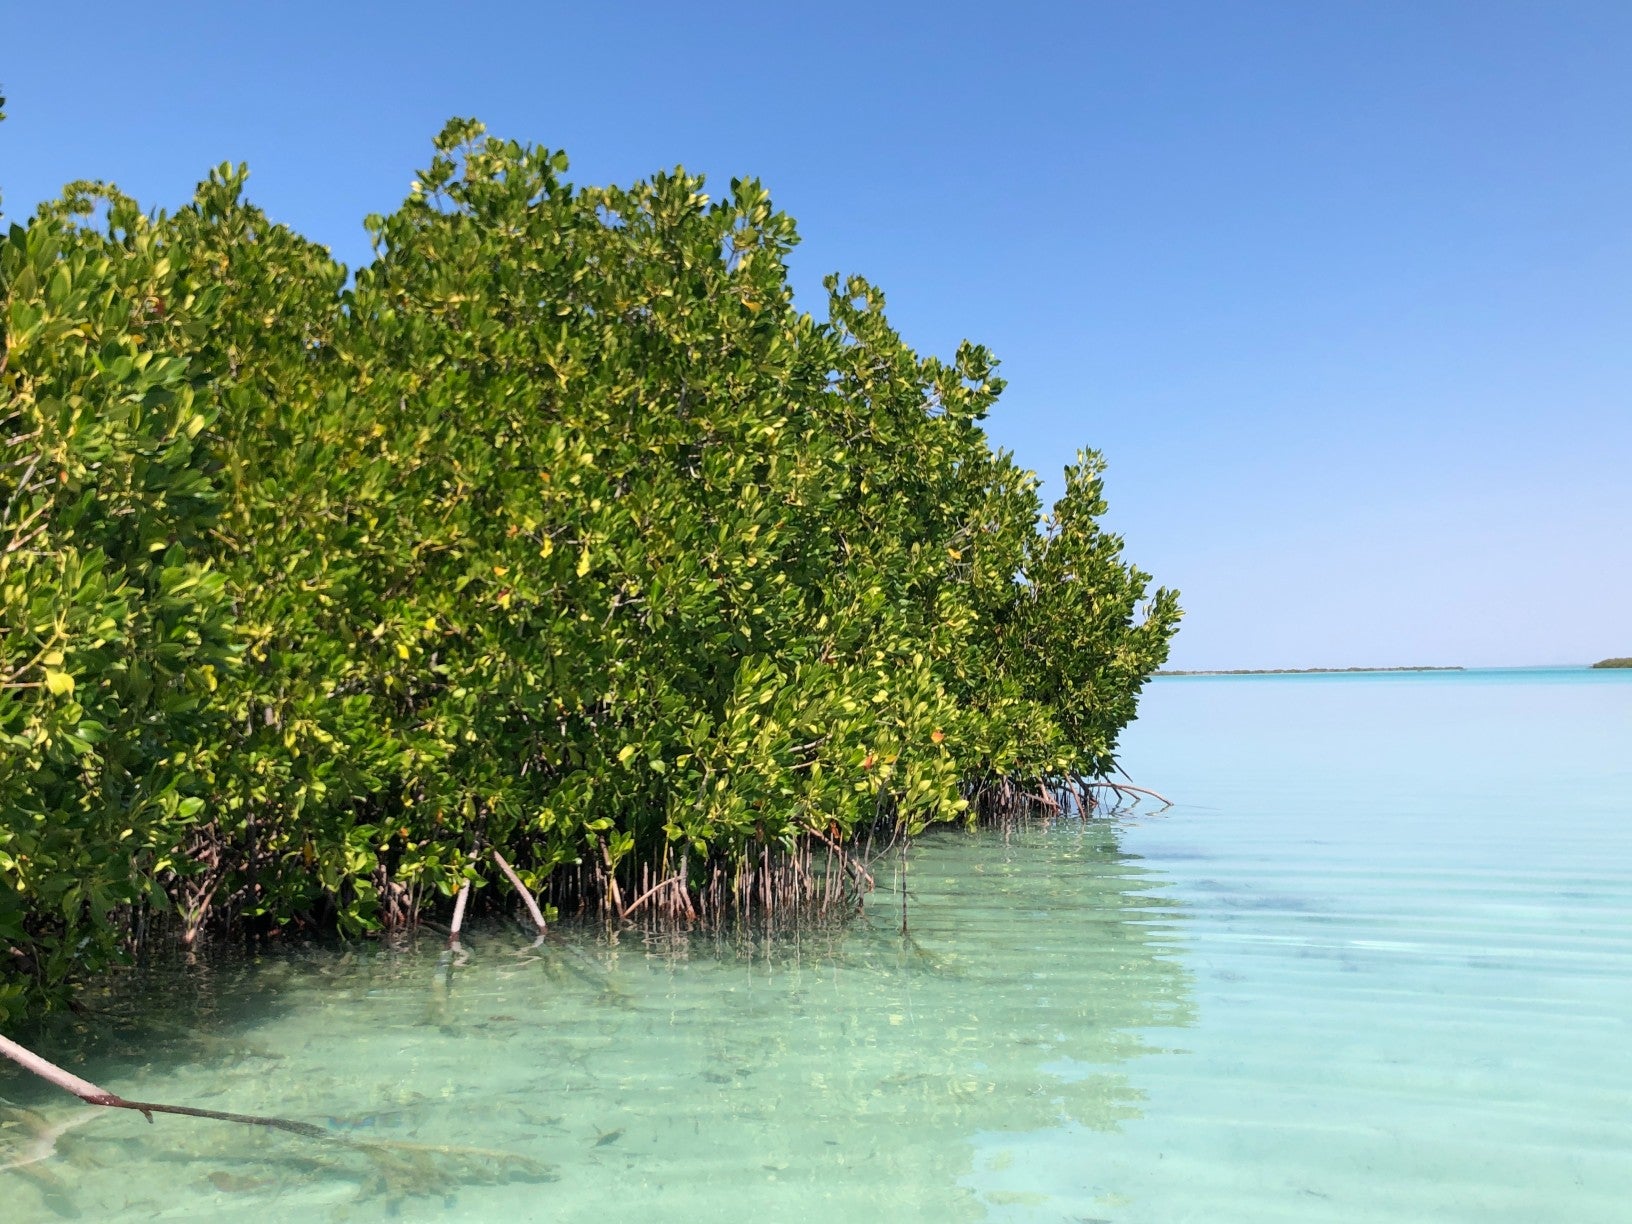 Red mangroves growing in the Red Sea off the coast of Saudi Arabia